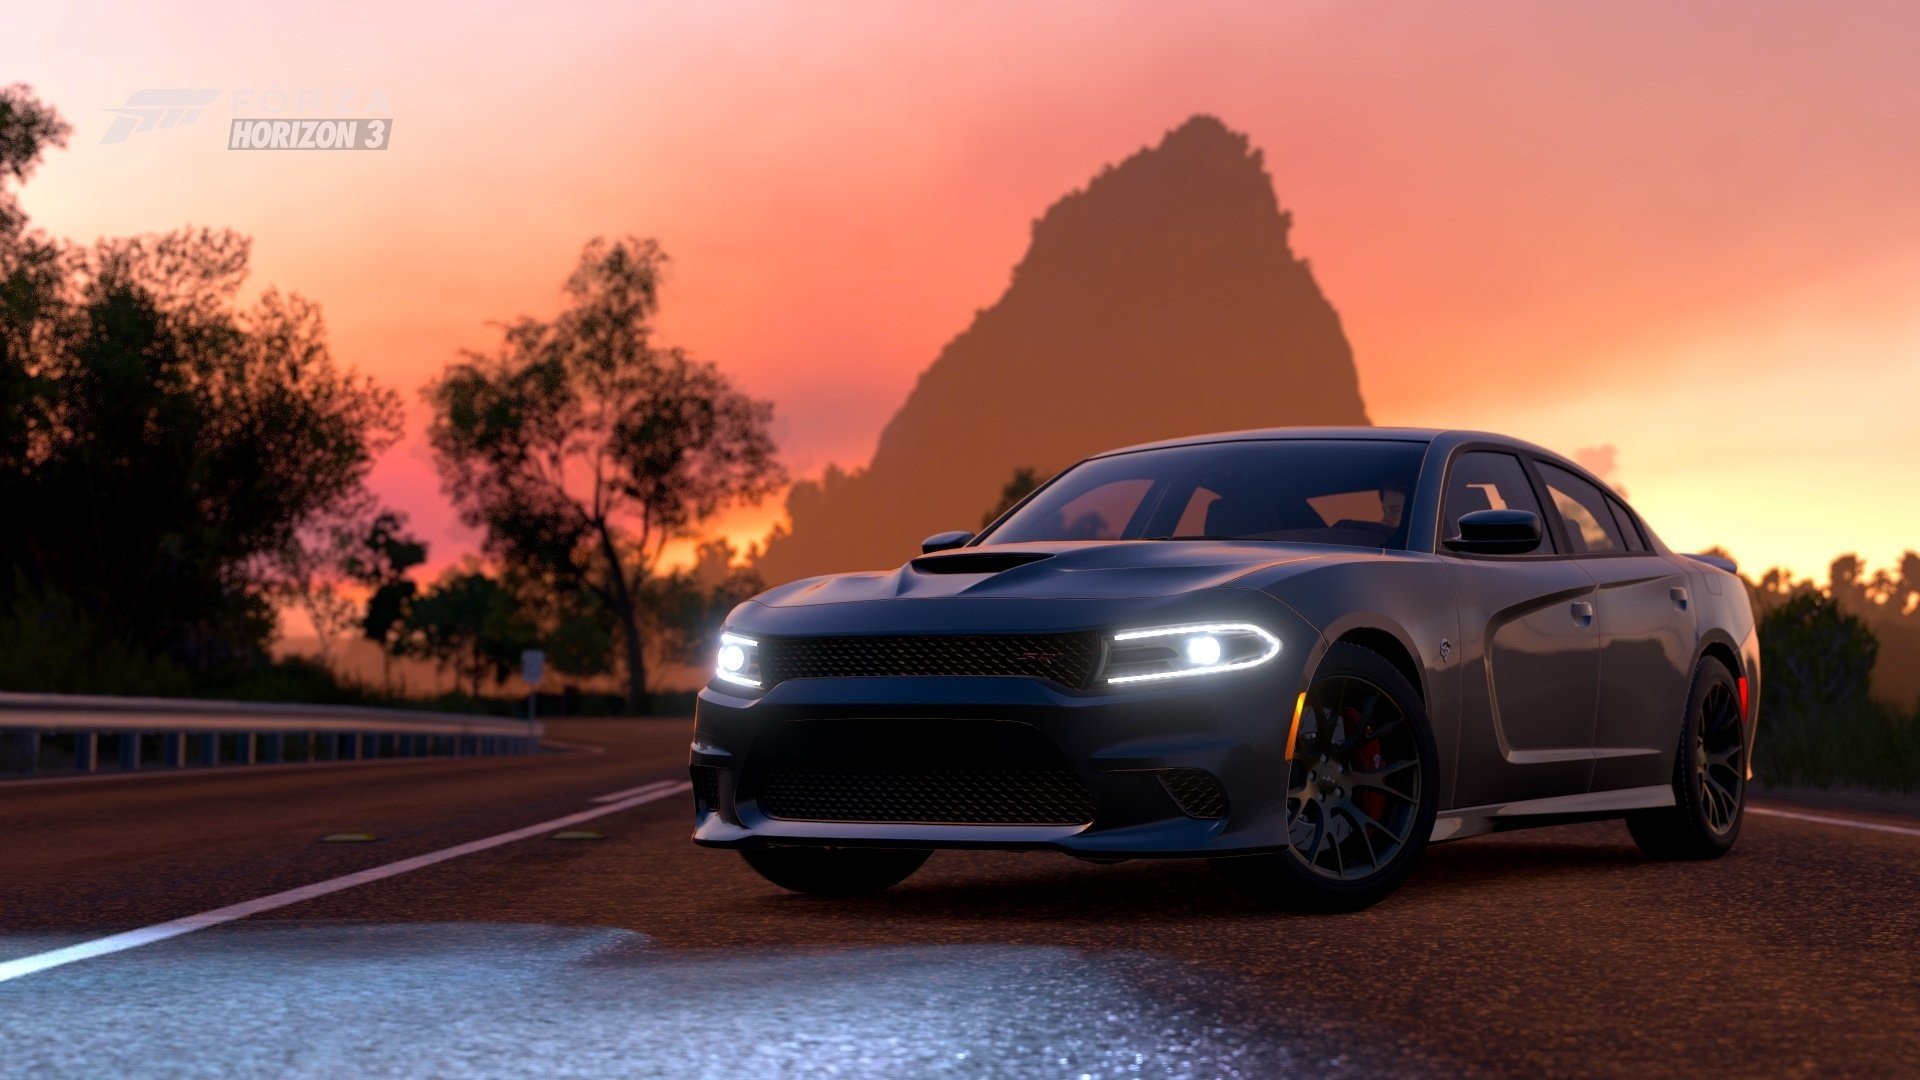 68 Charger Hellcat Wallpapers on WallpaperPlay